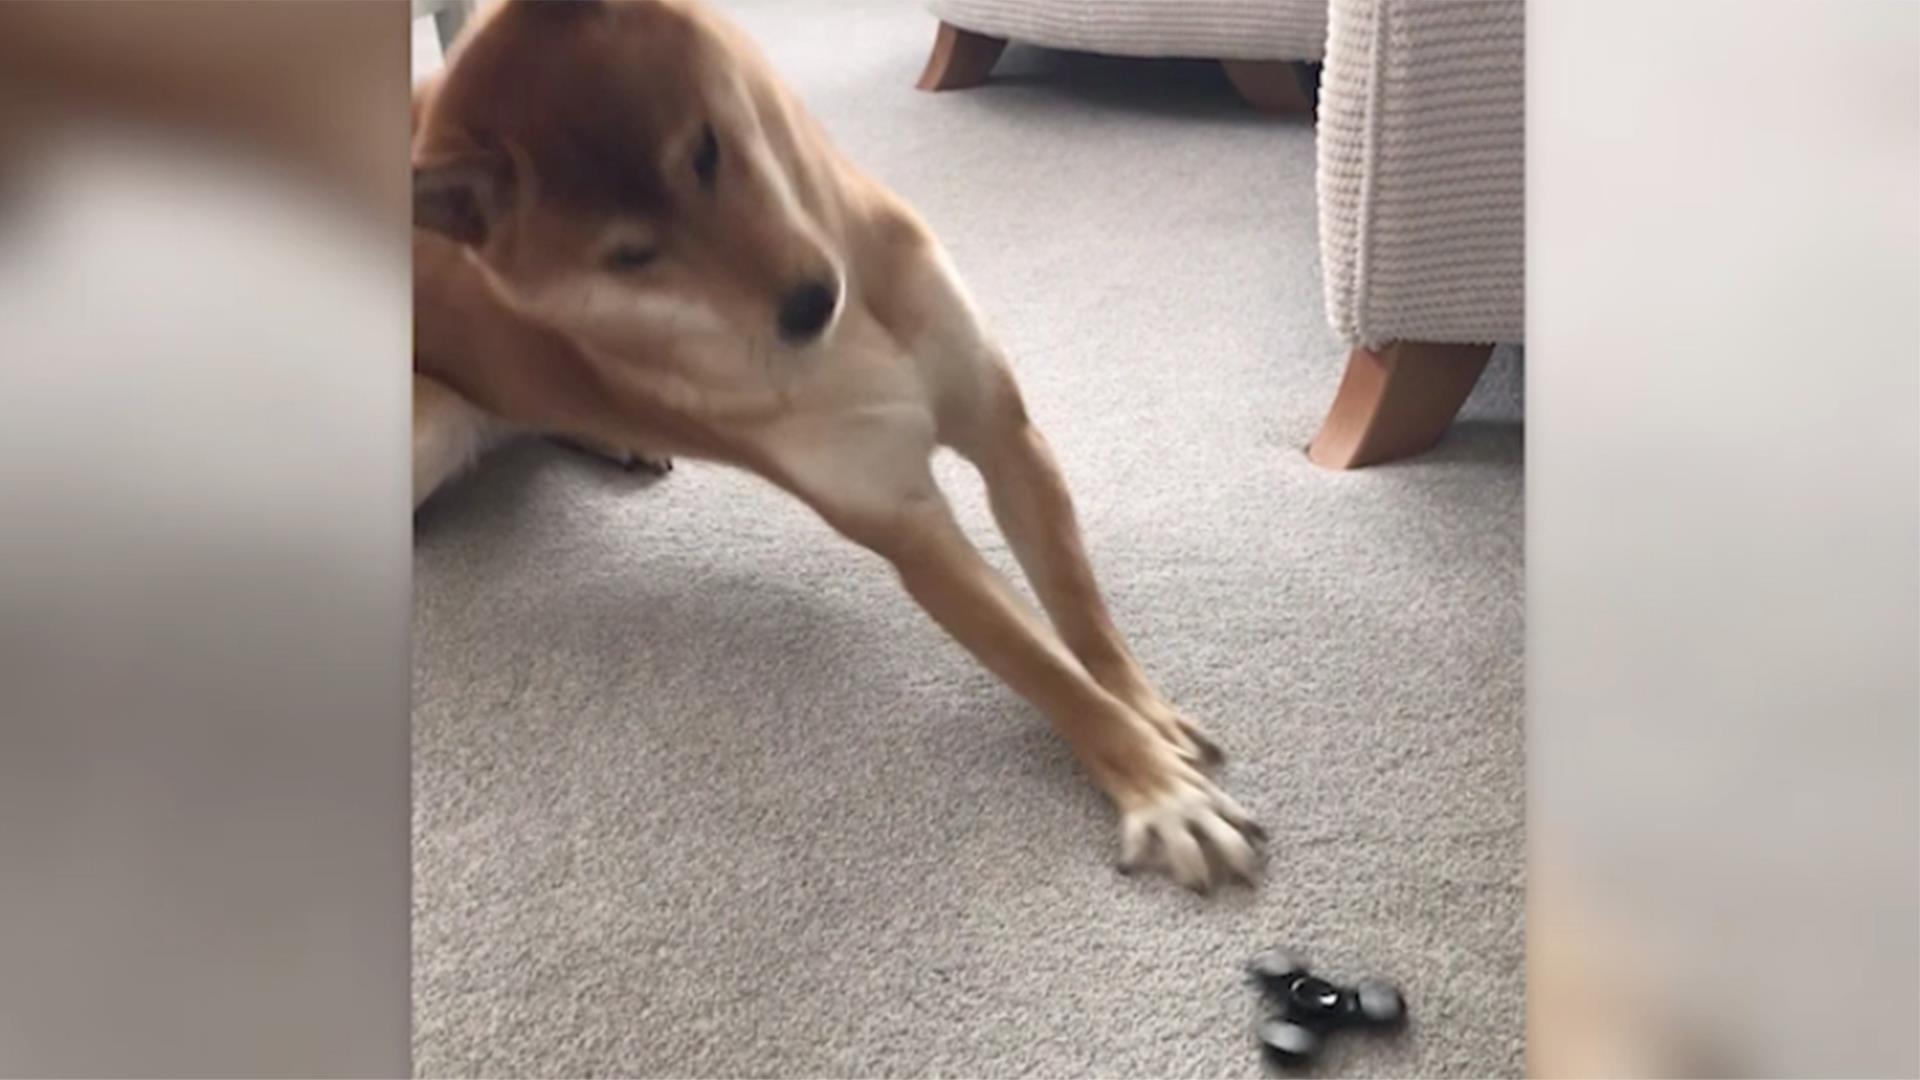 This dog can't handle the fidget spinner and it's hilarious